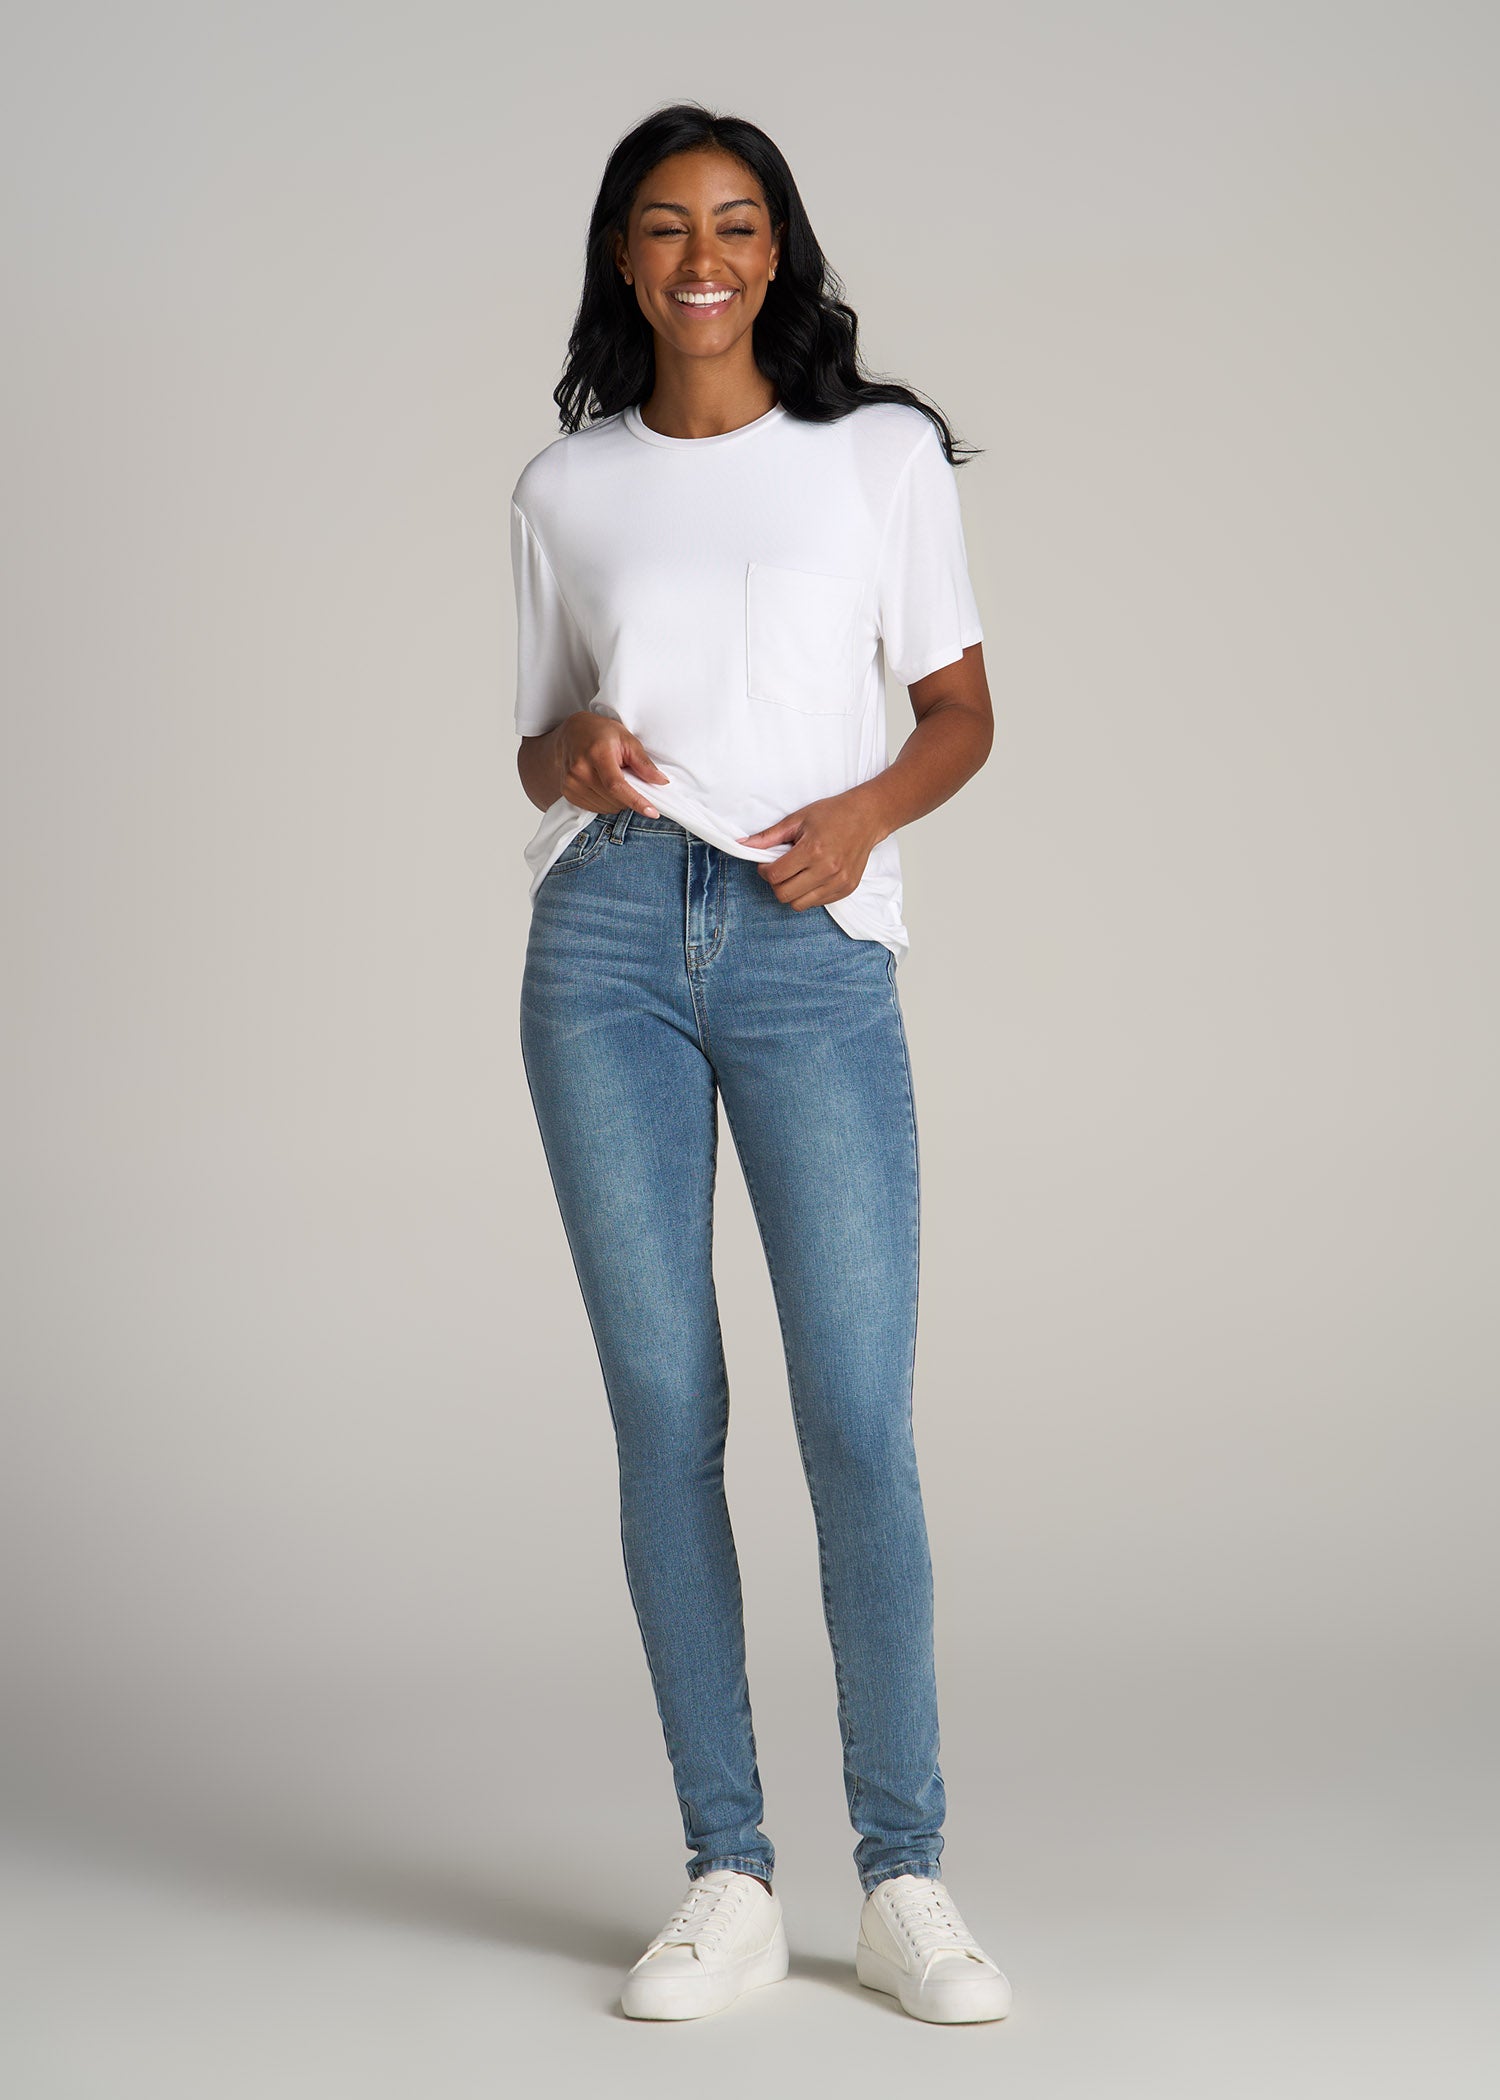 High Waist Jeans Skinny Jeans Stretch pants For Women